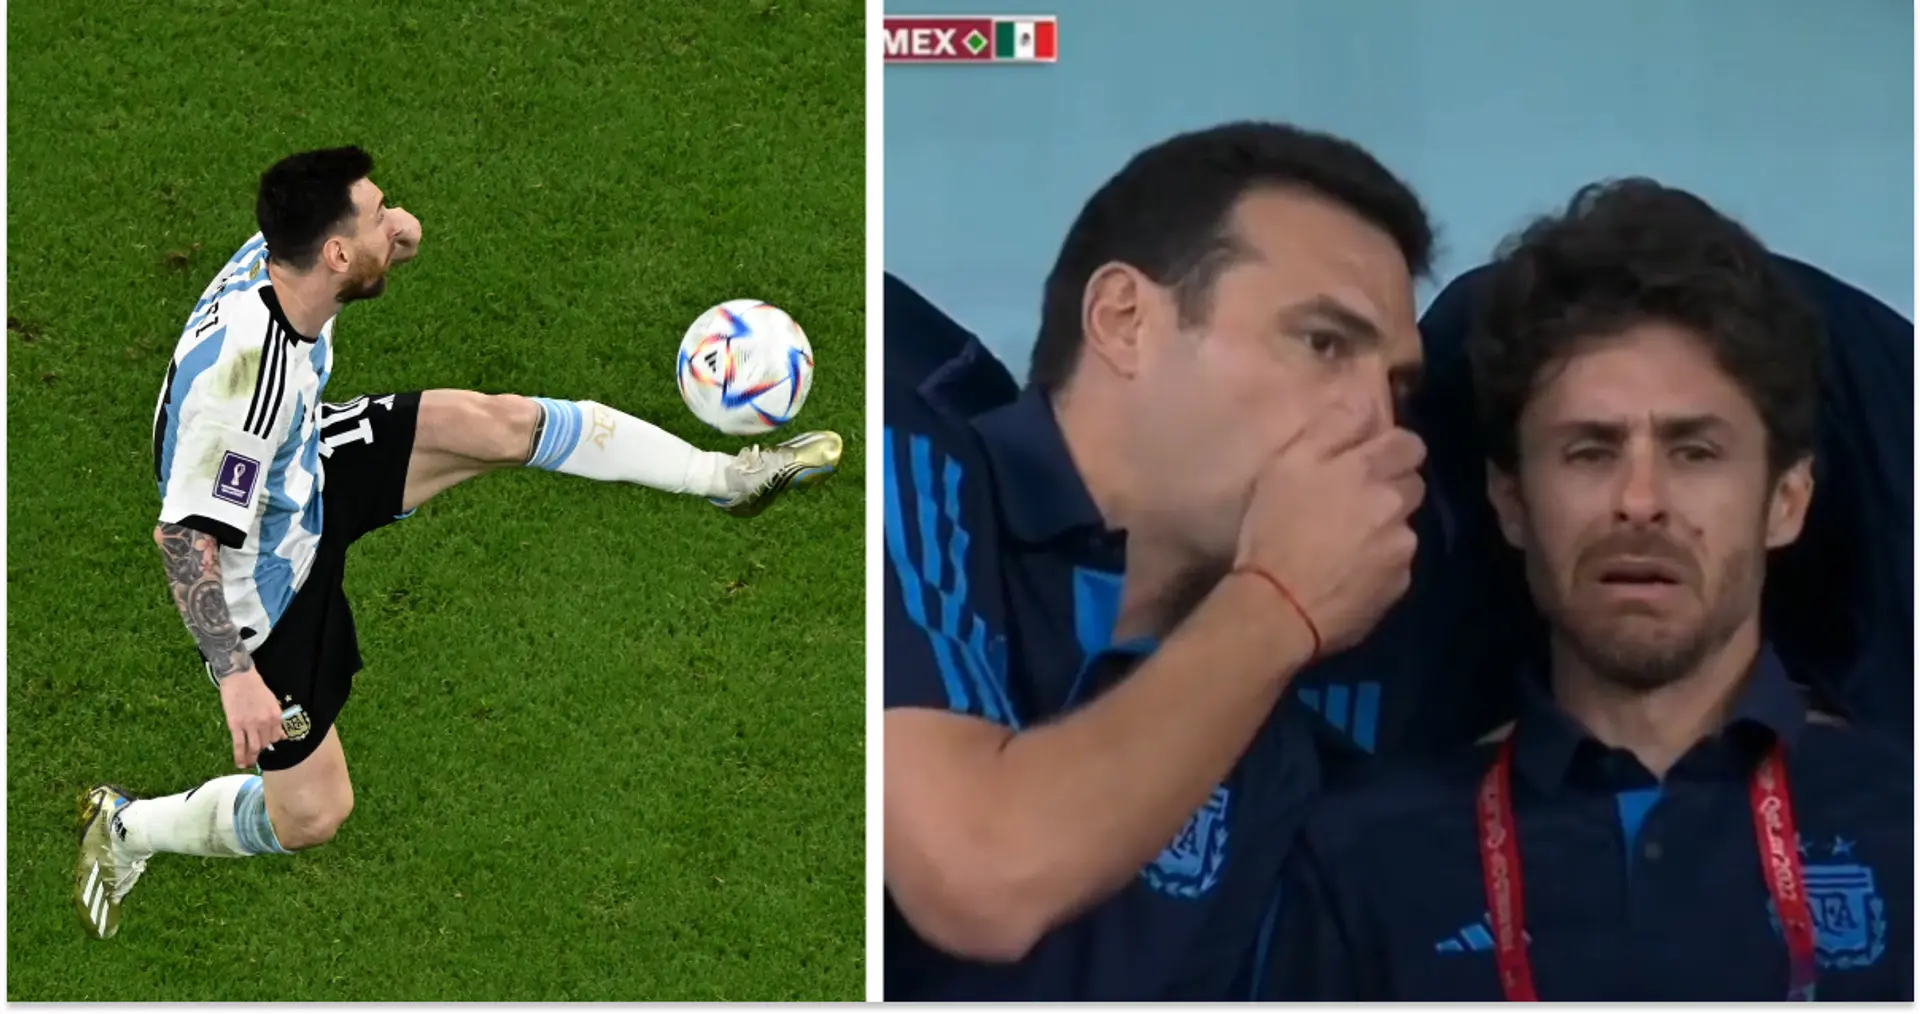 Argentina coach Aimar spotted crying after Messi goal - he's one of Leo idols